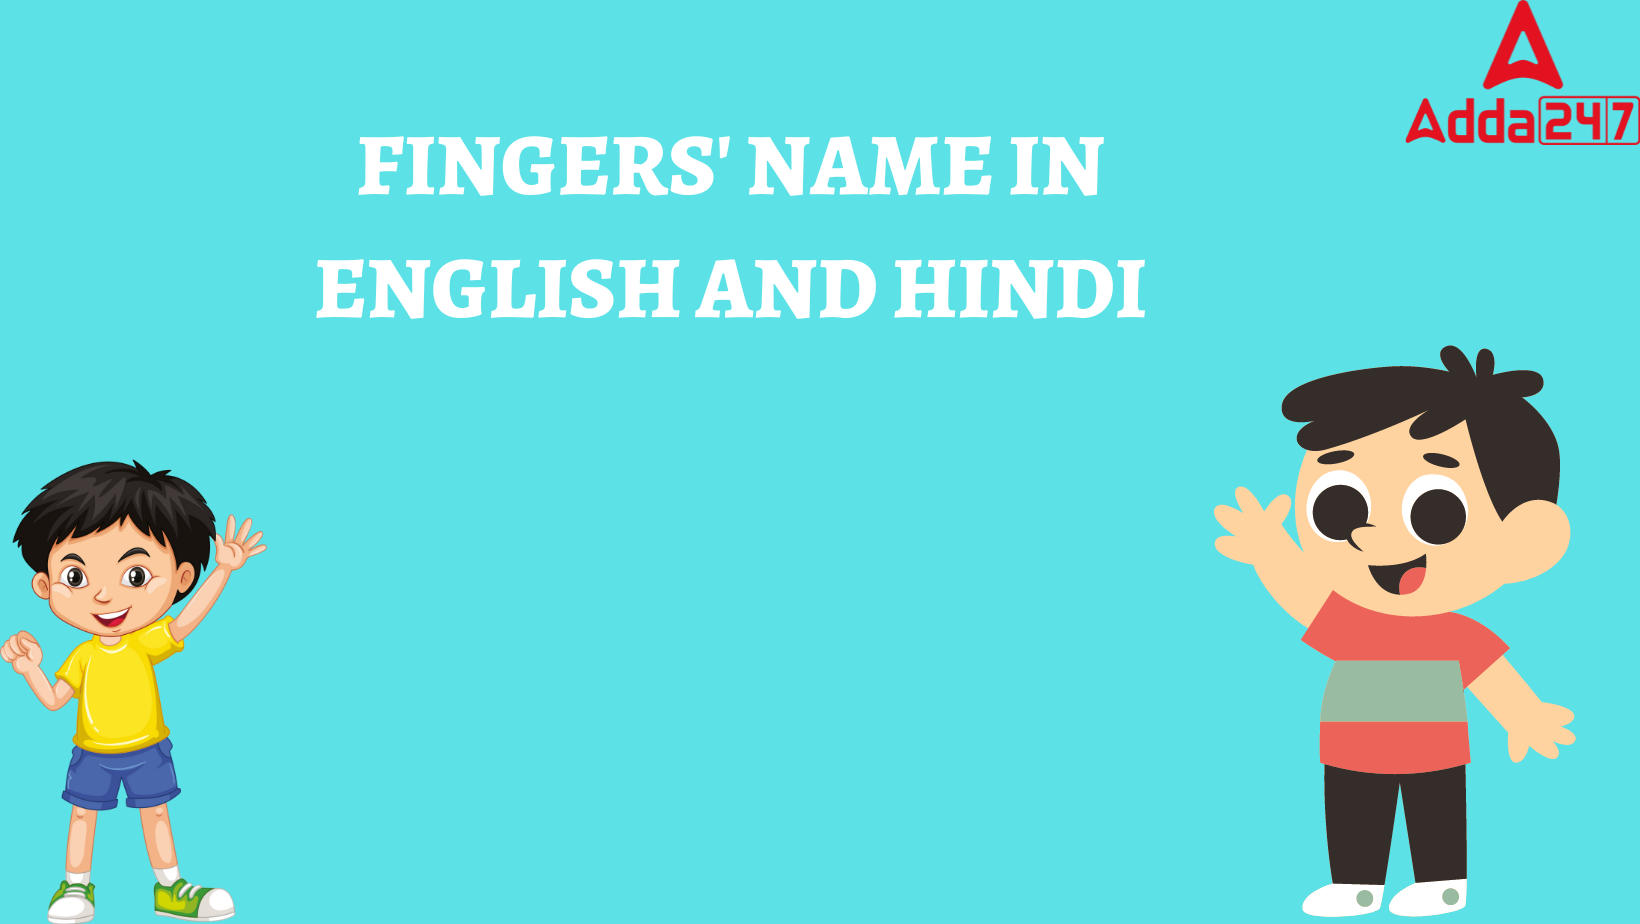 FINGERS NAME IN ENGLISH AND HINDI